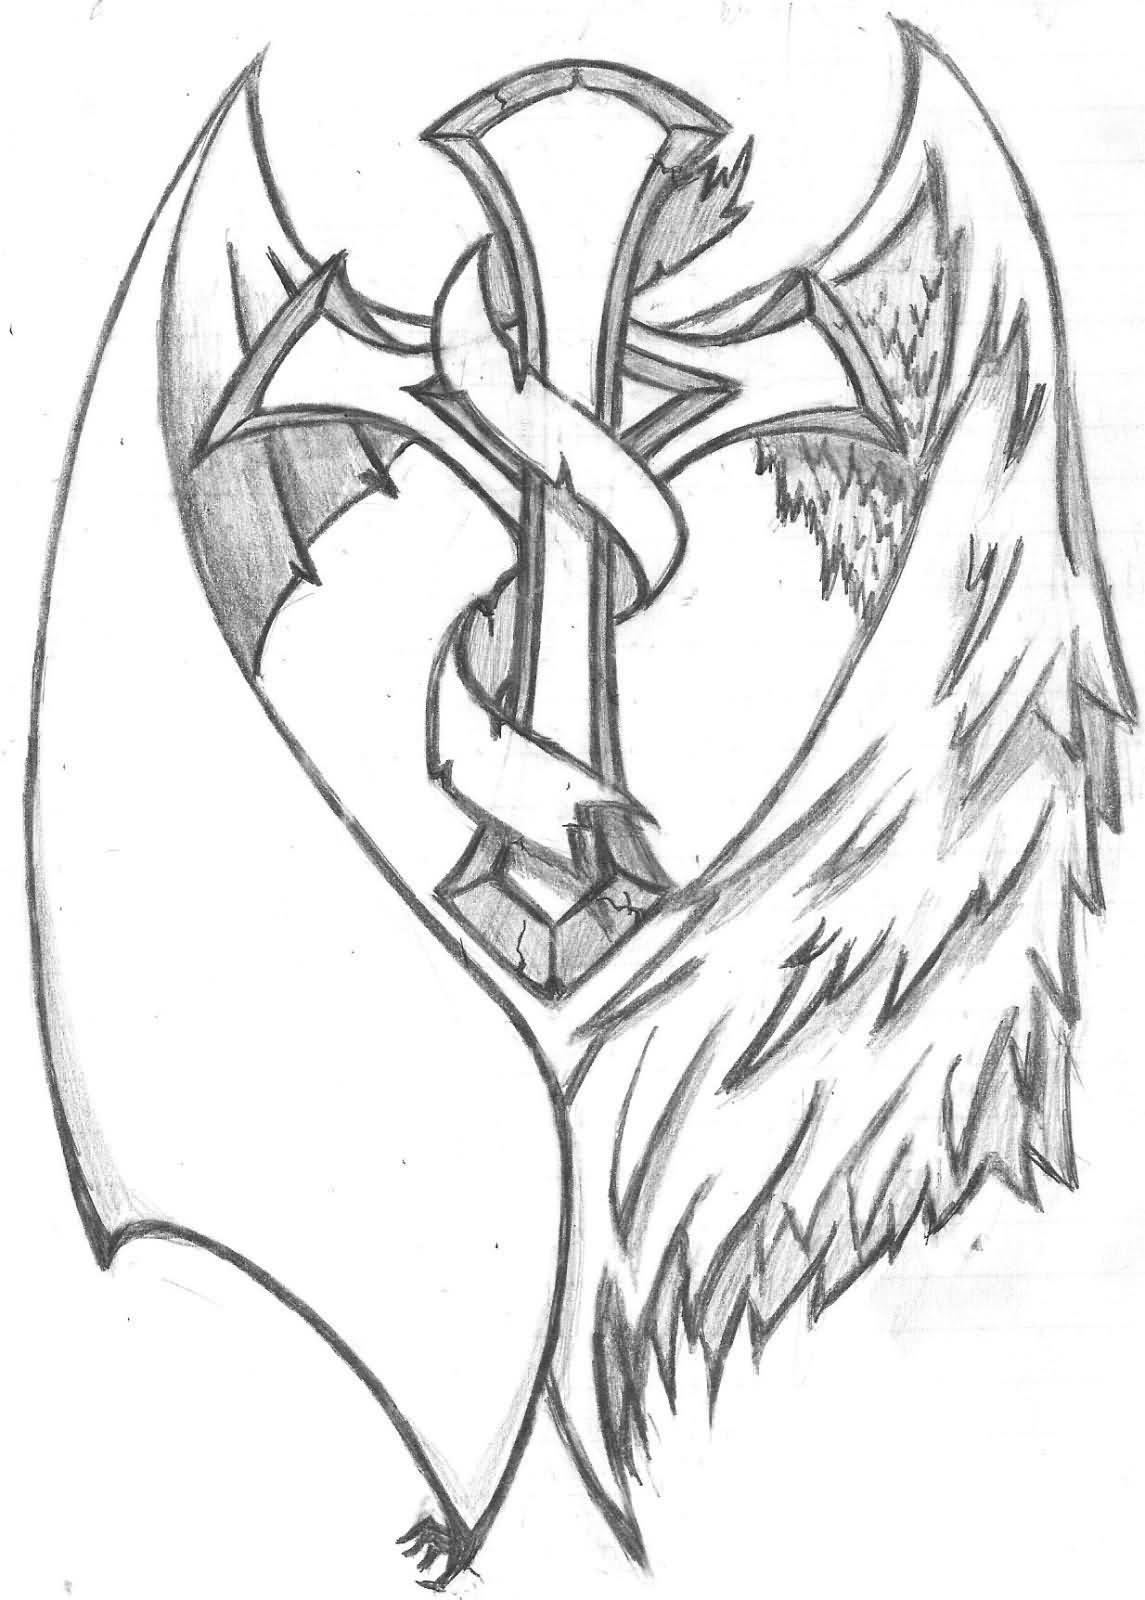 Black-And-Grey-Cross-With-Wings-Tattoo-Design-By-Streadwelljr.